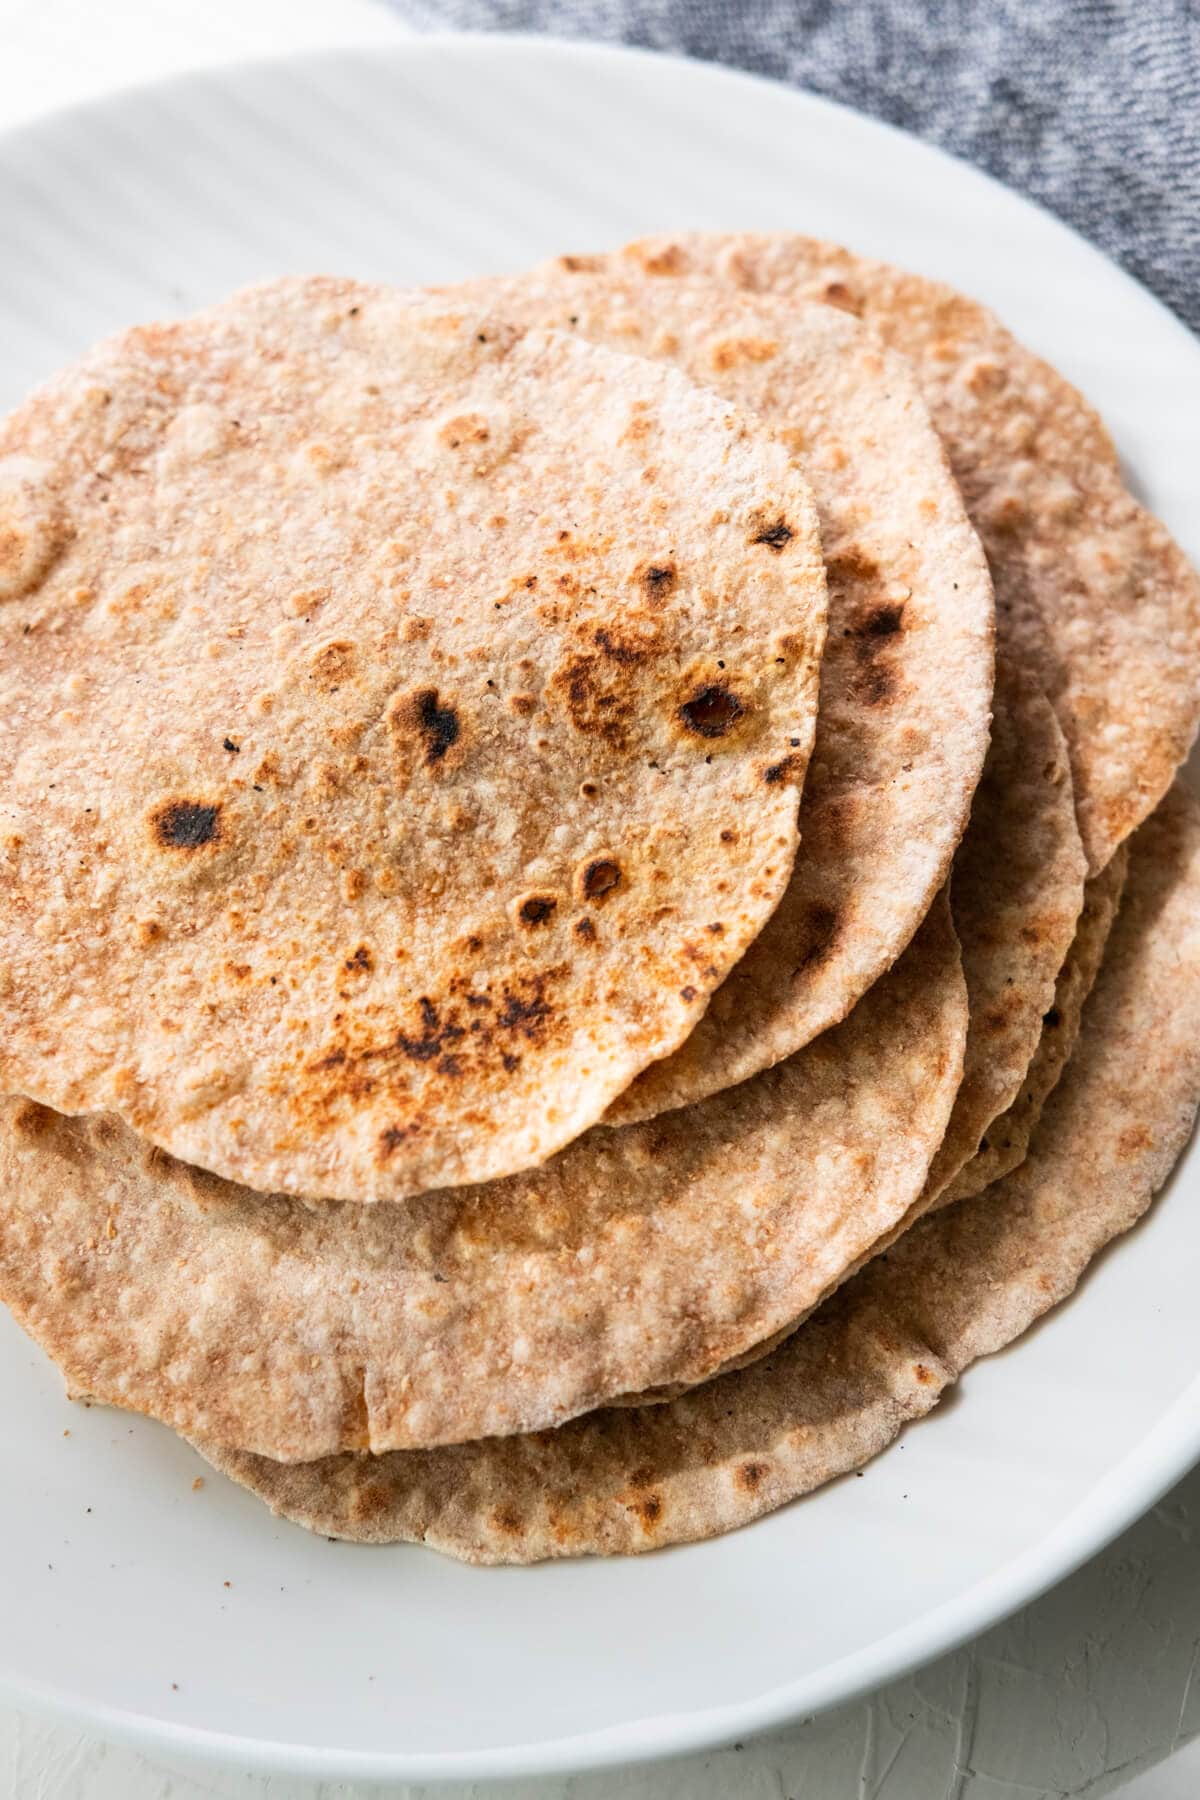 Chapati Indian flatbread served on a plate.